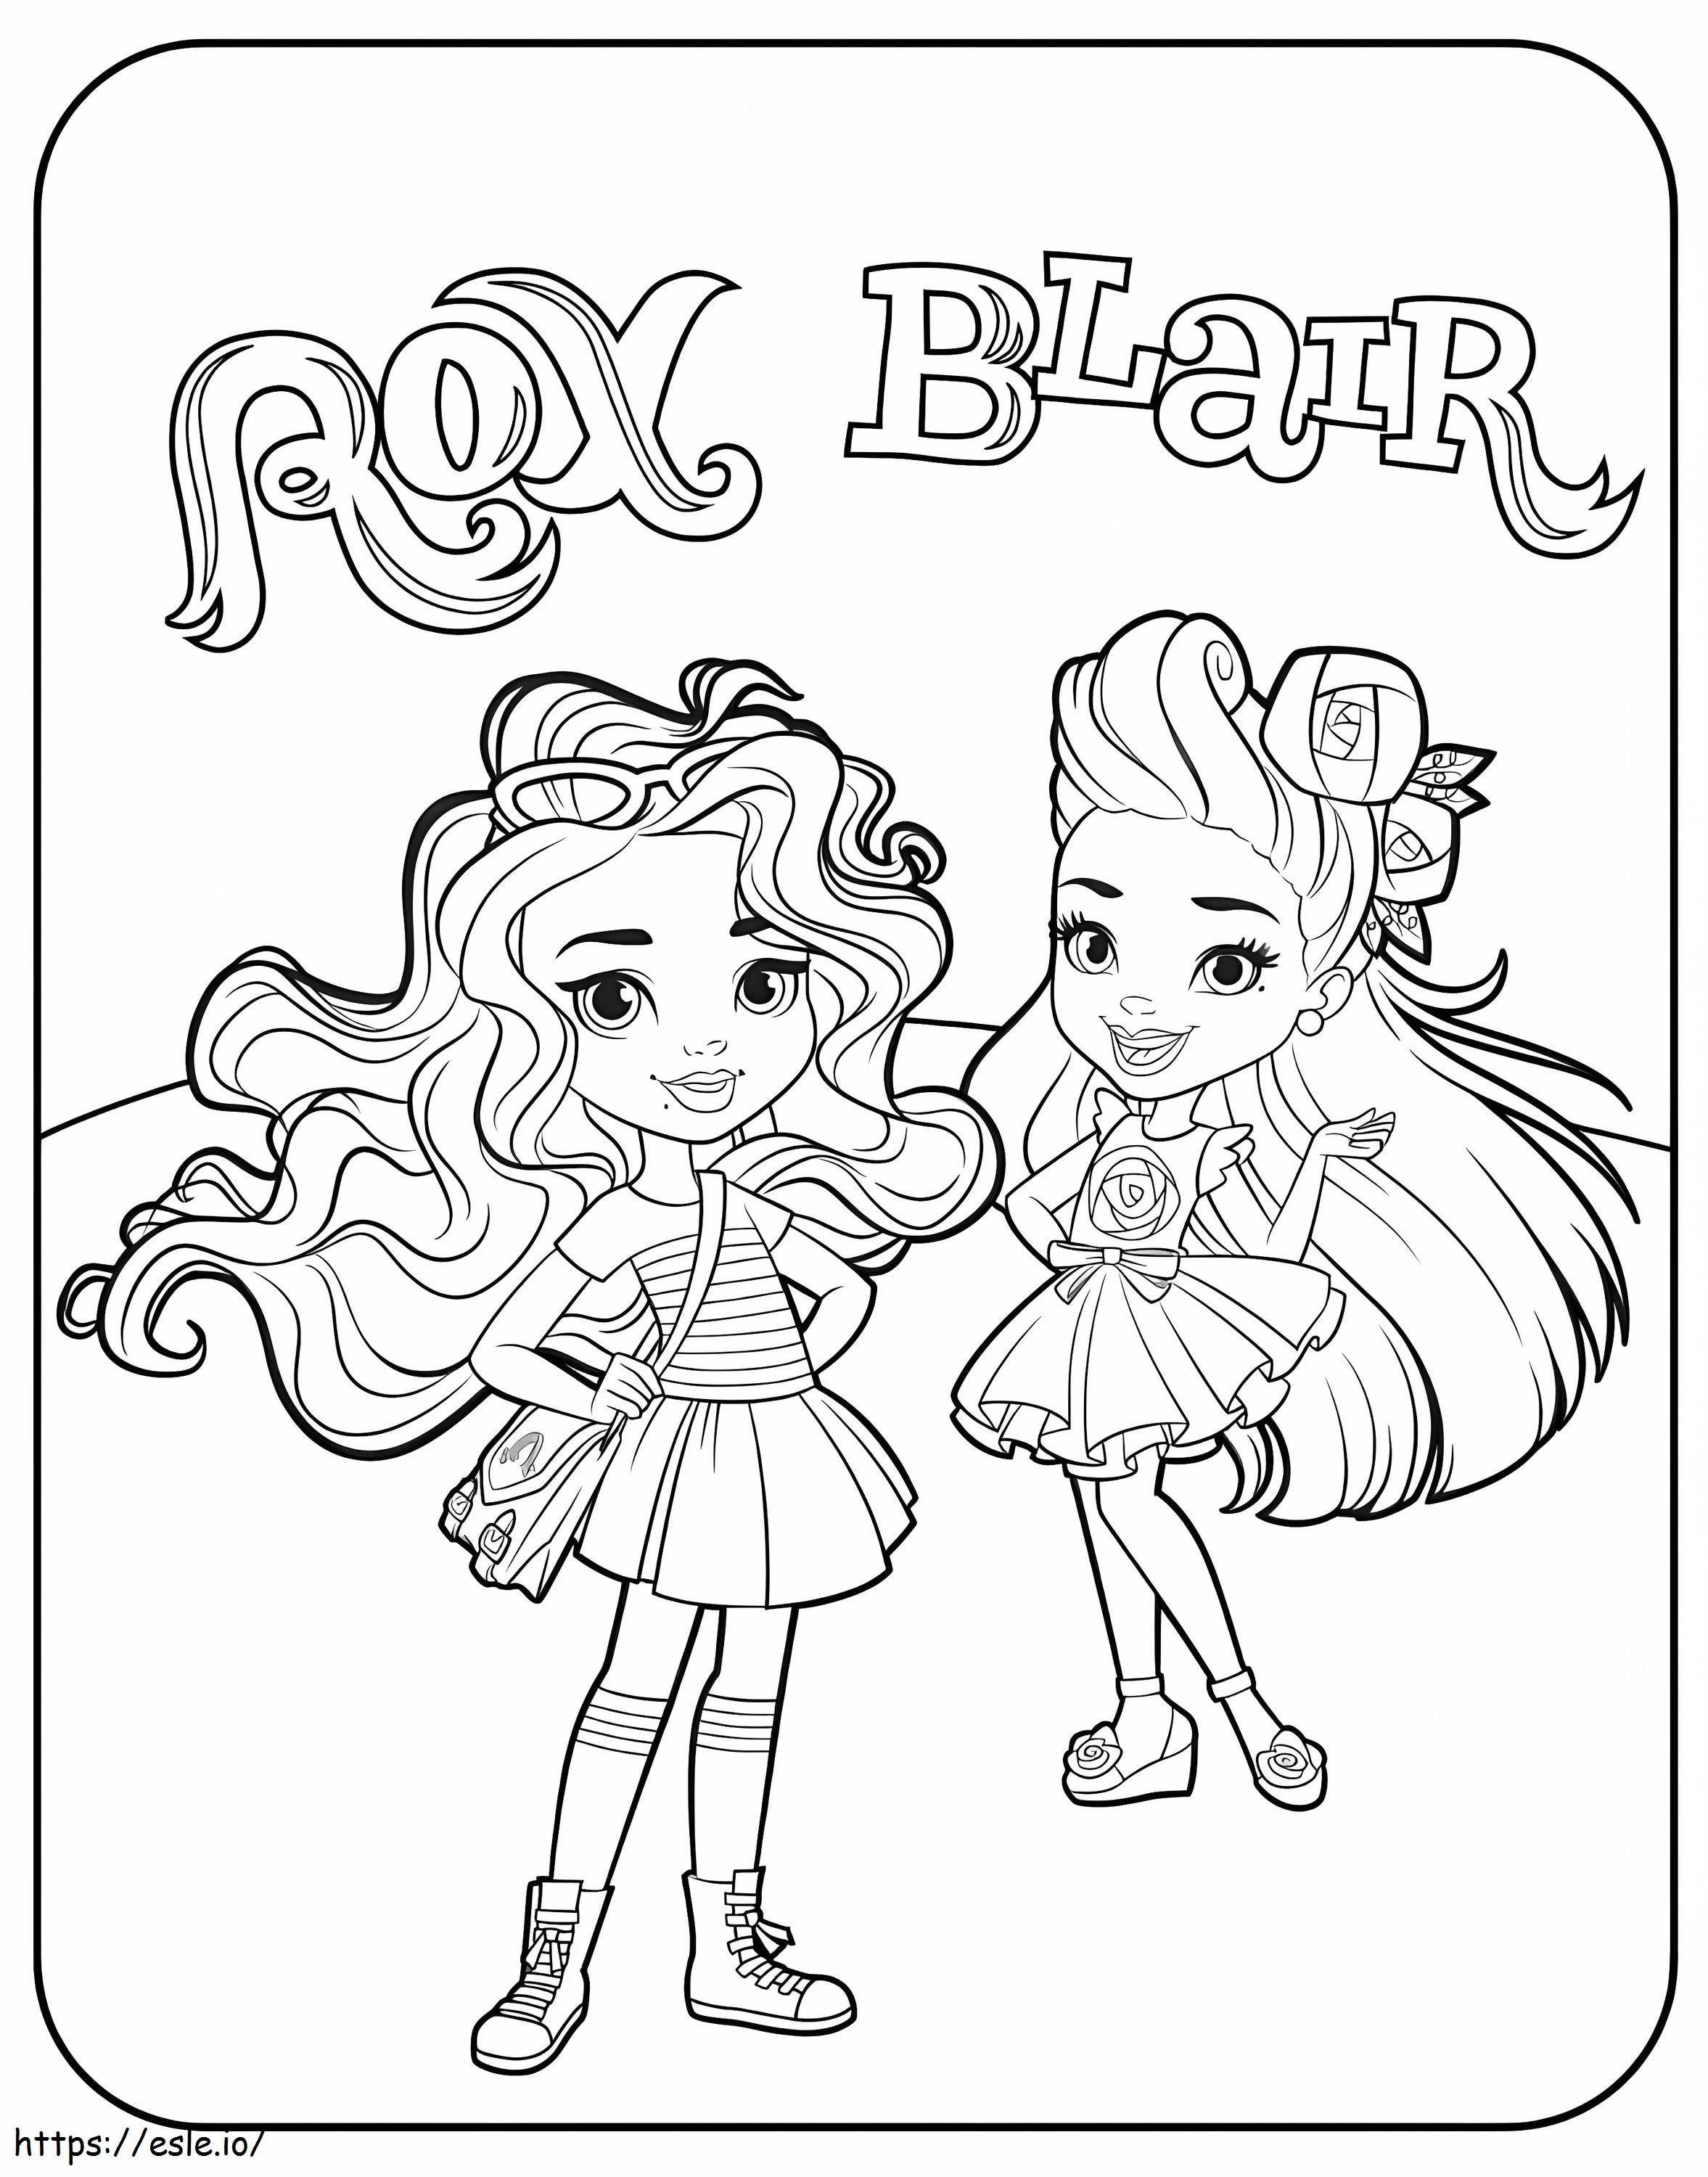 Rox And Blair Sunny Day coloring page